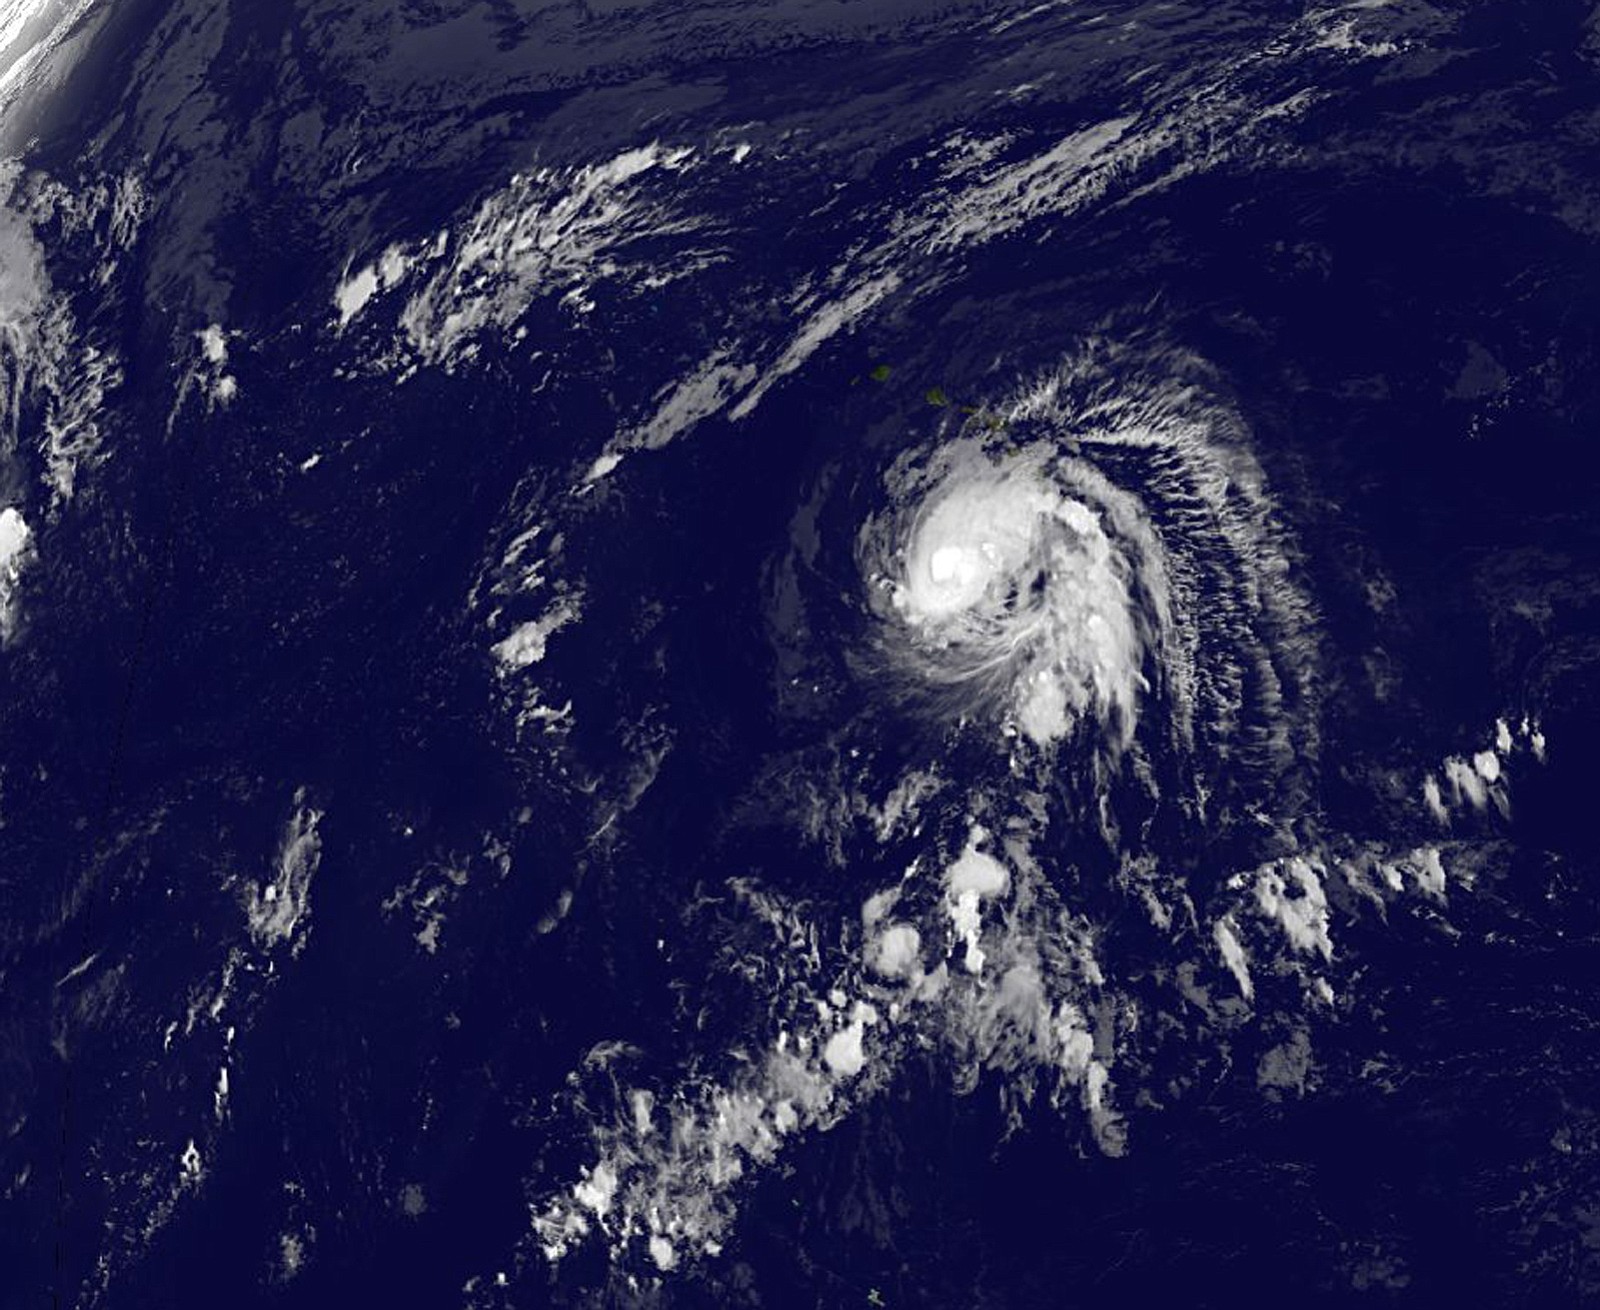 NOAA
This satellite image shows Hurricane Ana approaching Hawaii on Oct. 18.